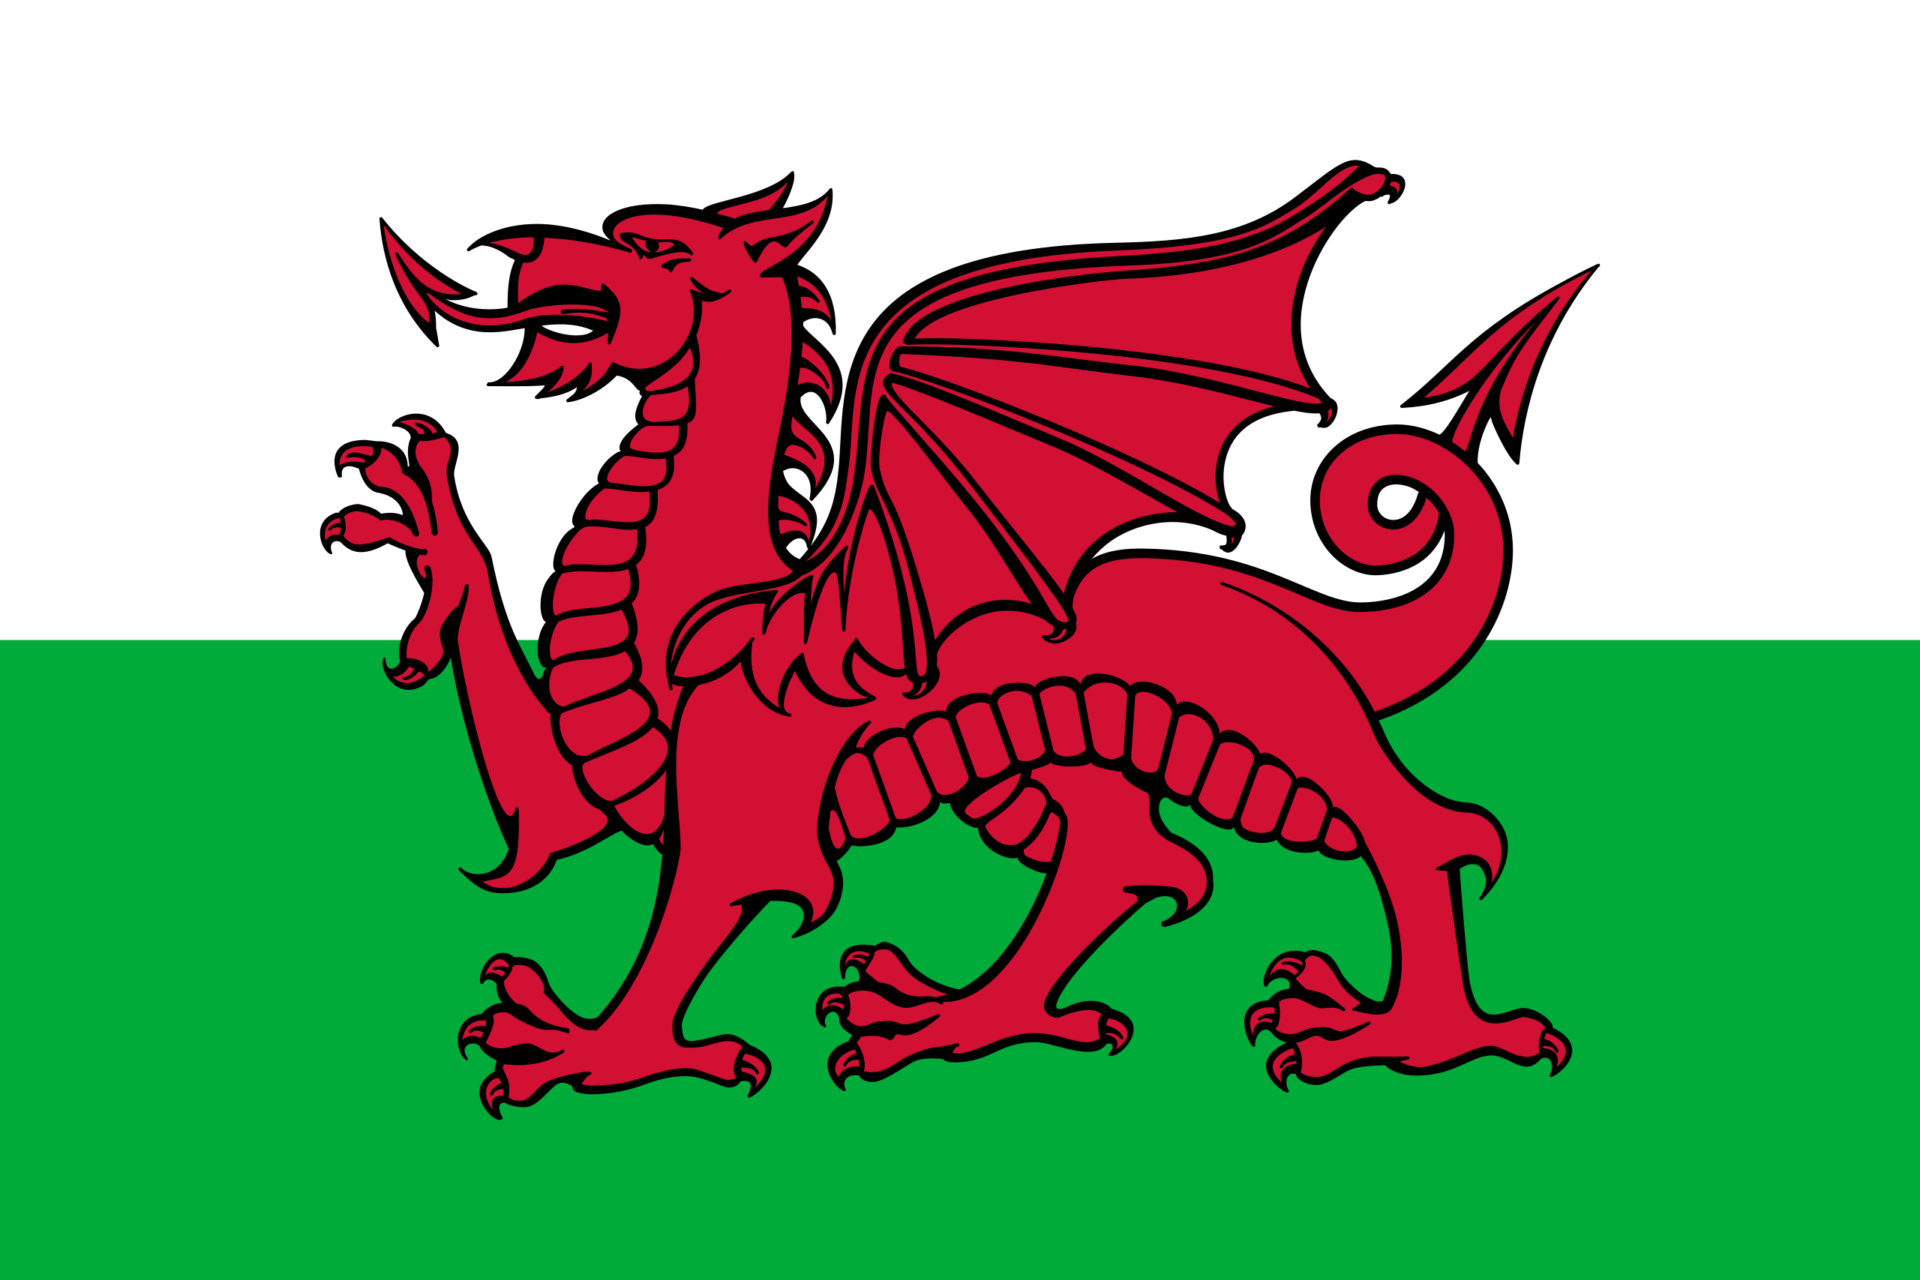 2560px-Flag_of_Wales_(1959).svg